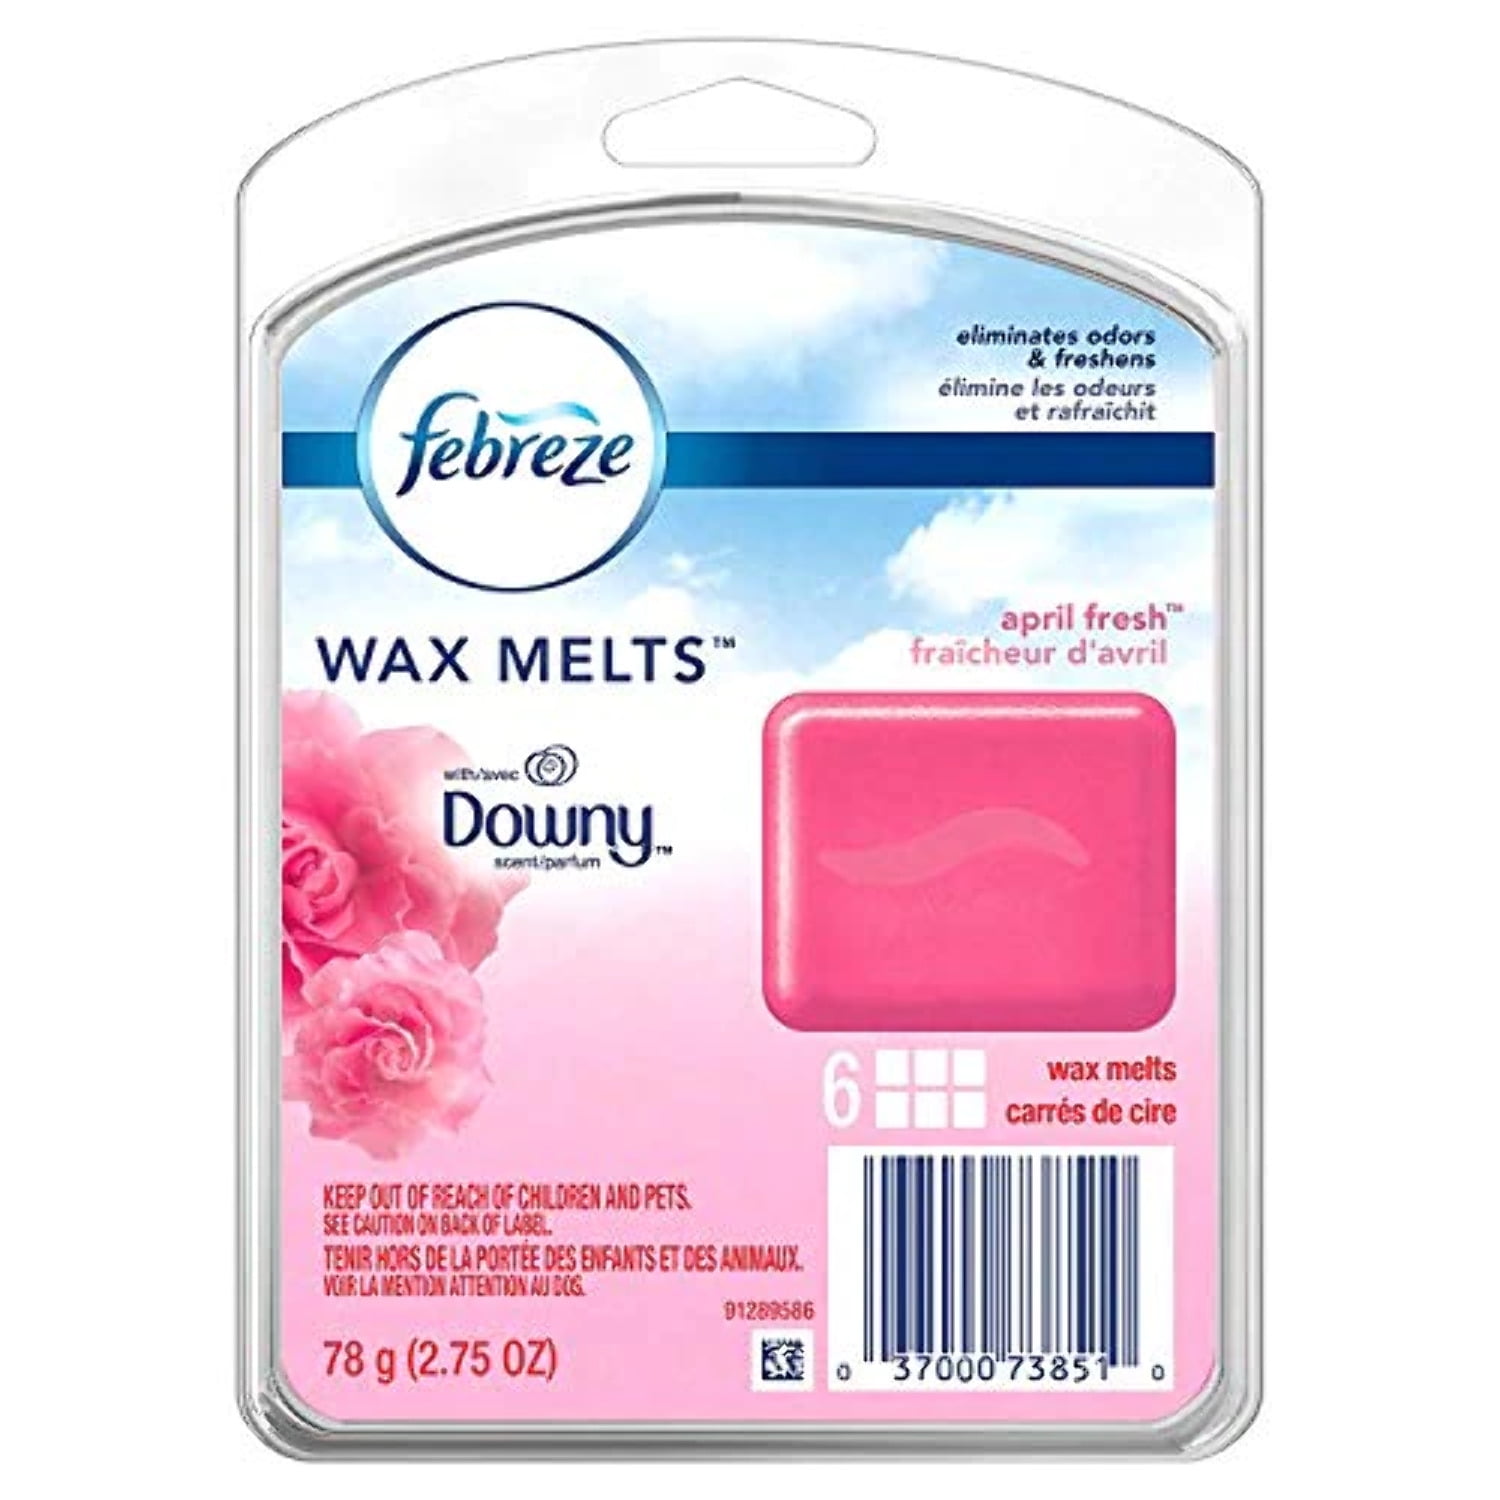 Febreze Wax Melts Quick Review - Musings of a Muse